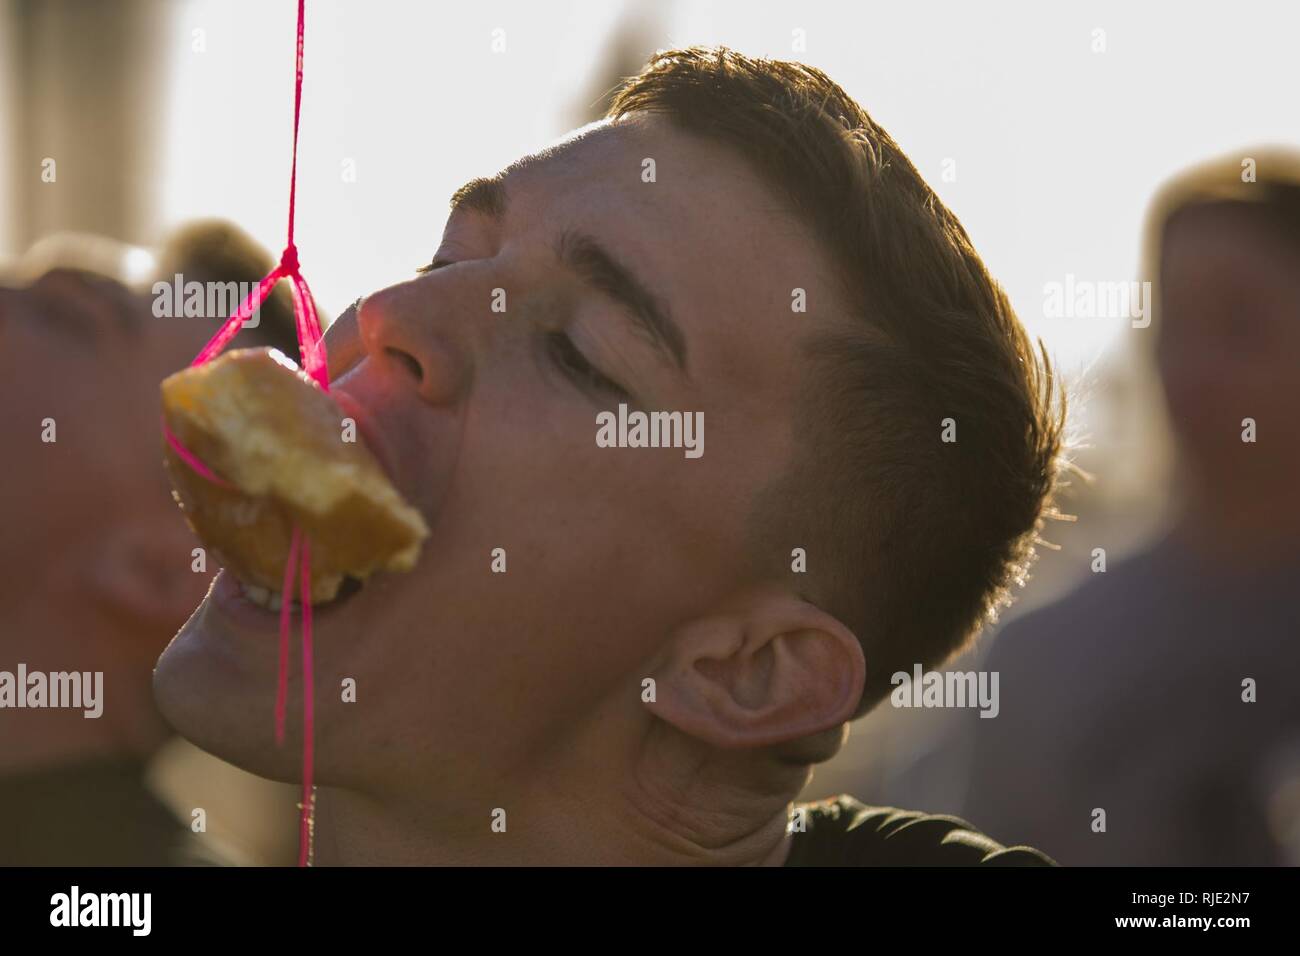 U.S. Marine Corps Flight Line Mechanic Lance Cpl. Shay Valdivieso, assigned to the Search and Rescue Unit with Headquarters & Headquarters Squadron (H&HS) at Marine Corps Air Station Yuma, Ariz., participates in the Donut Challenge, where Marines had to eat a pastry without using their hands during the H&HS Barracks Bash at Ramada Field Jan. 18, 2018. H&HS leadership and the station Single Marine Program coordinated the event to boost morale through fun, friendly competition. (Lance Cpl. Sabrina Candiaflores) Stock Photo